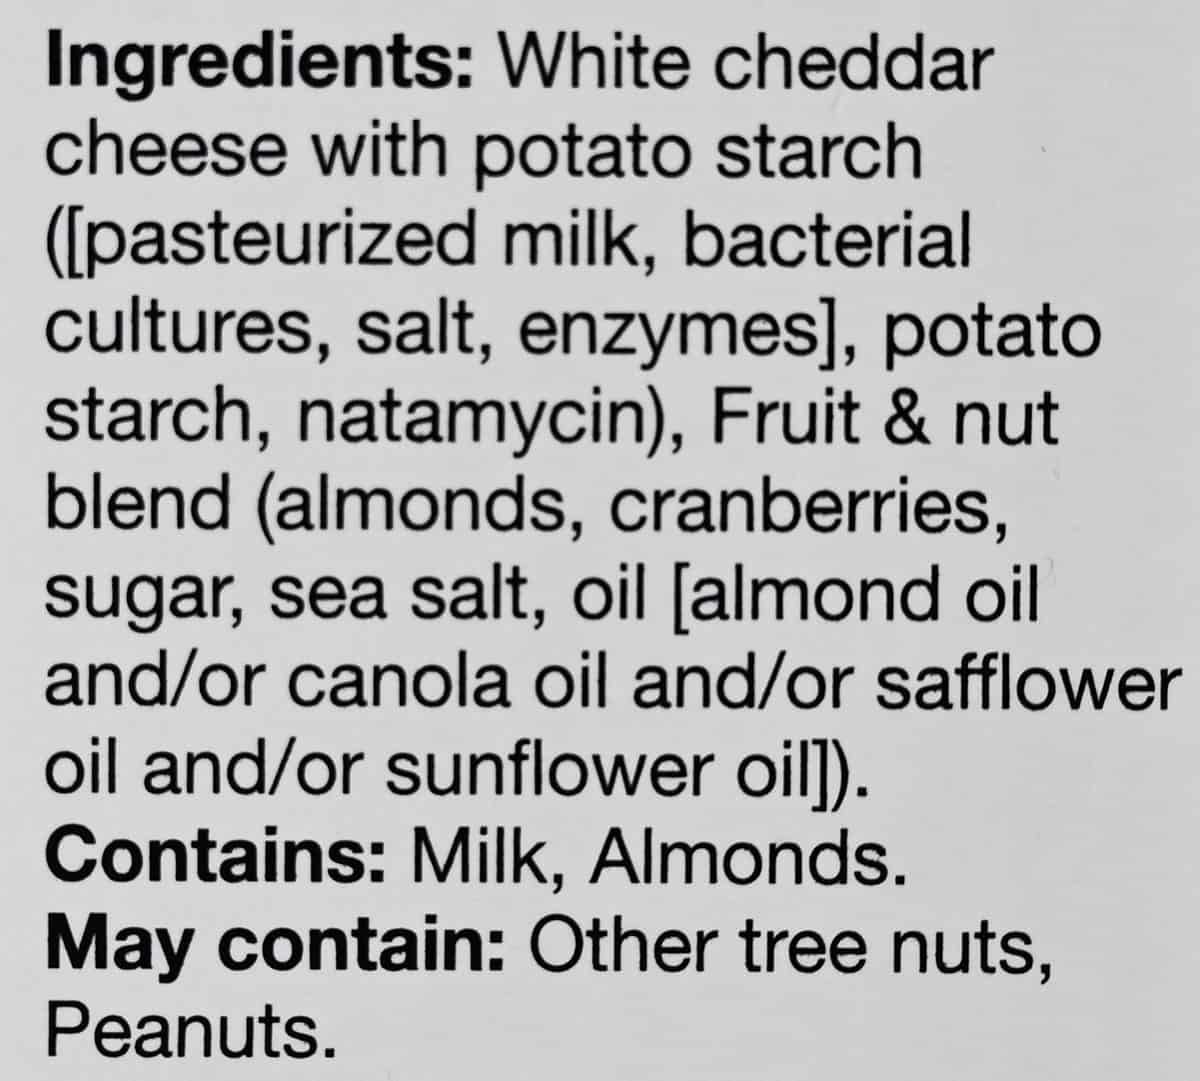 Image of the ingredients label for the white cheddar pack from the back of the box.